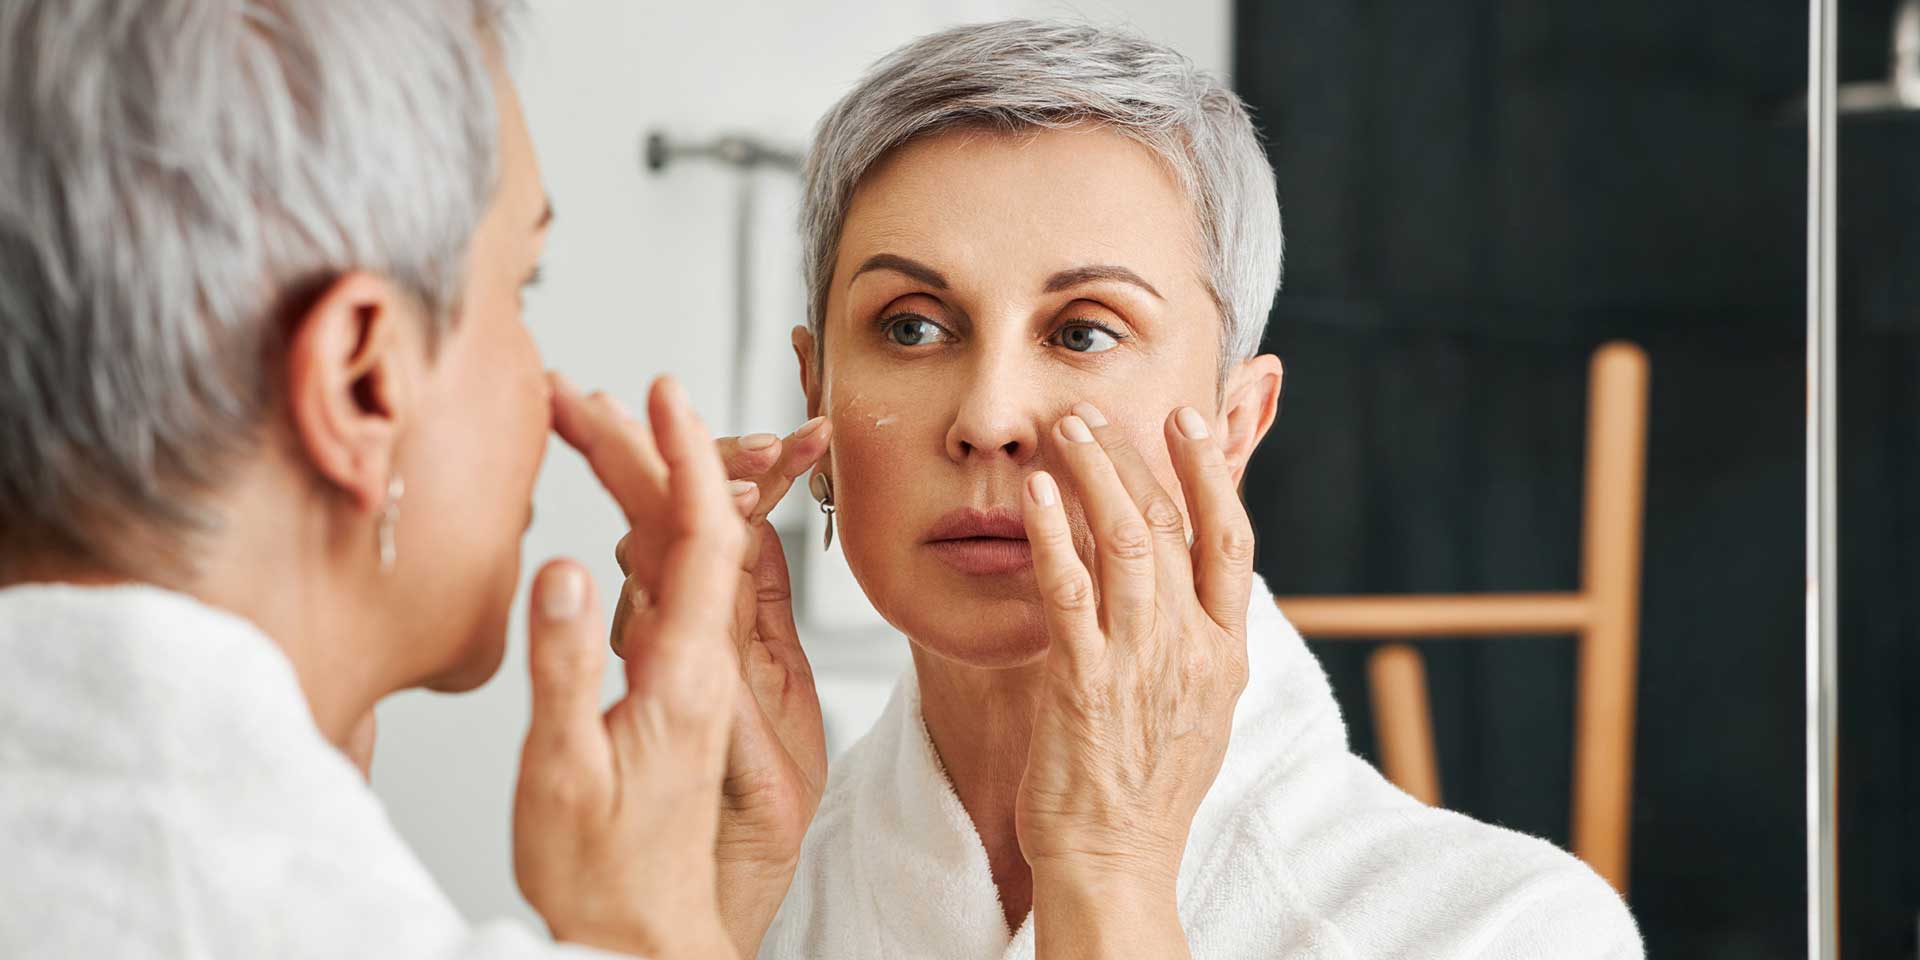 Use of retinoids for anti-aging